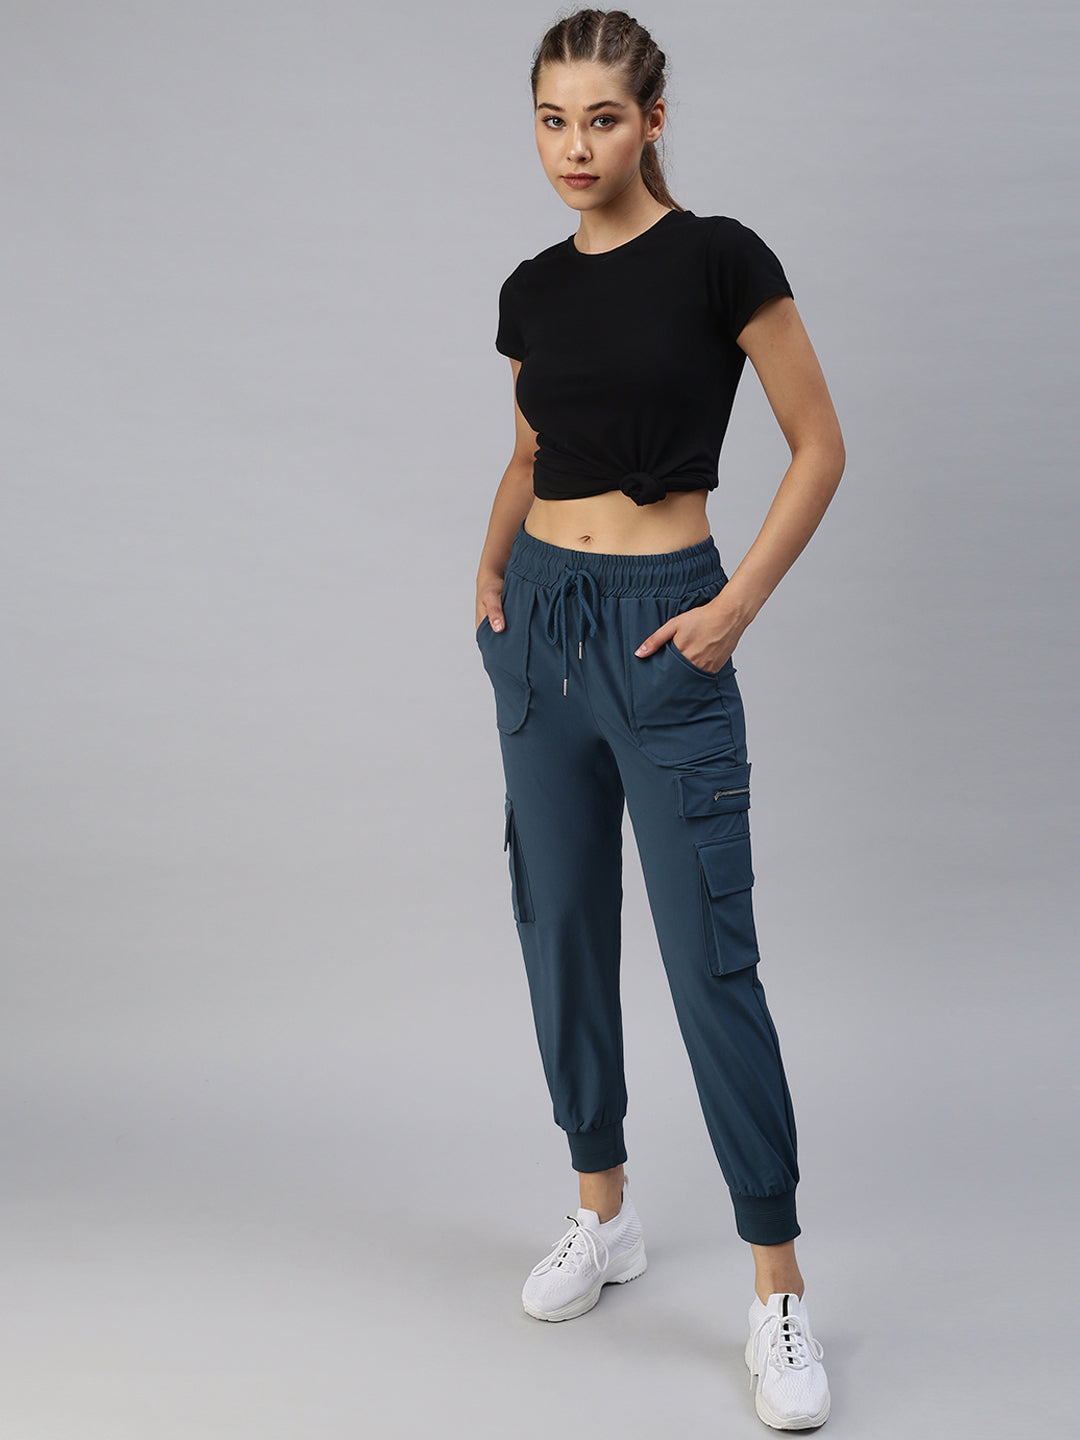 Women's Teal Solid Joggers Track Pant